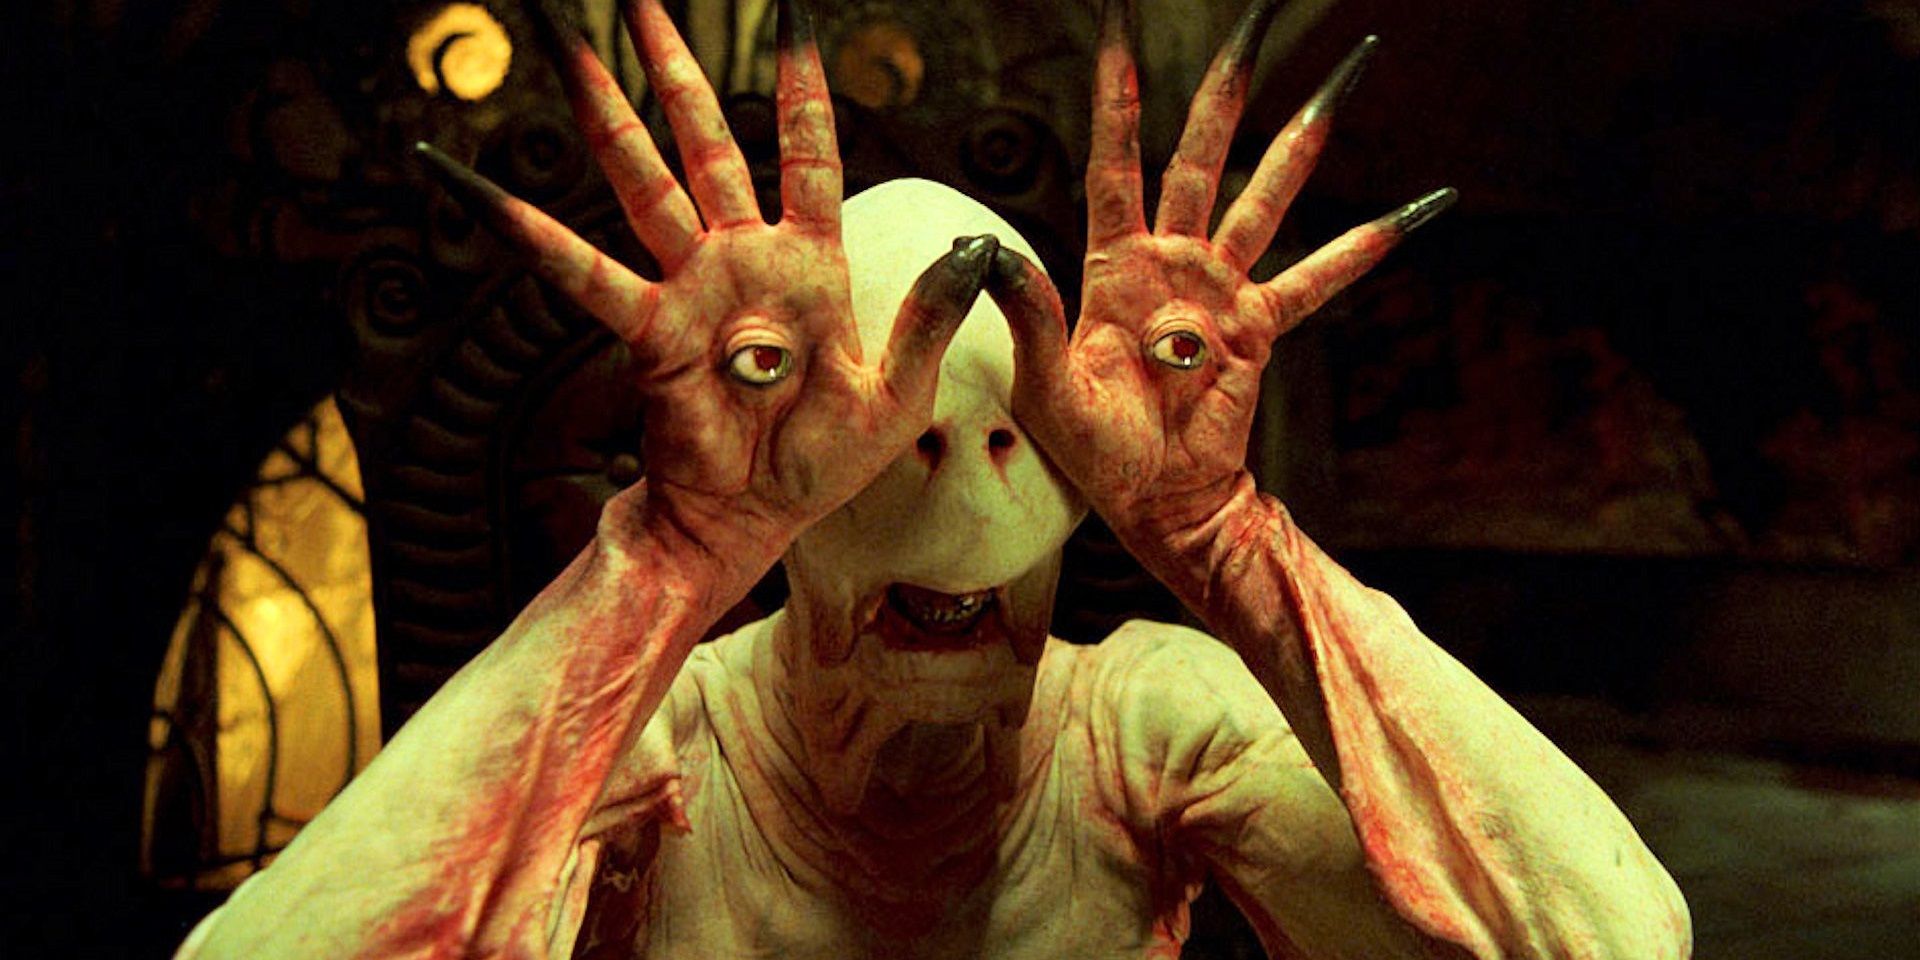 The Pale Man using his hands to see in Pan's Labyrinth.